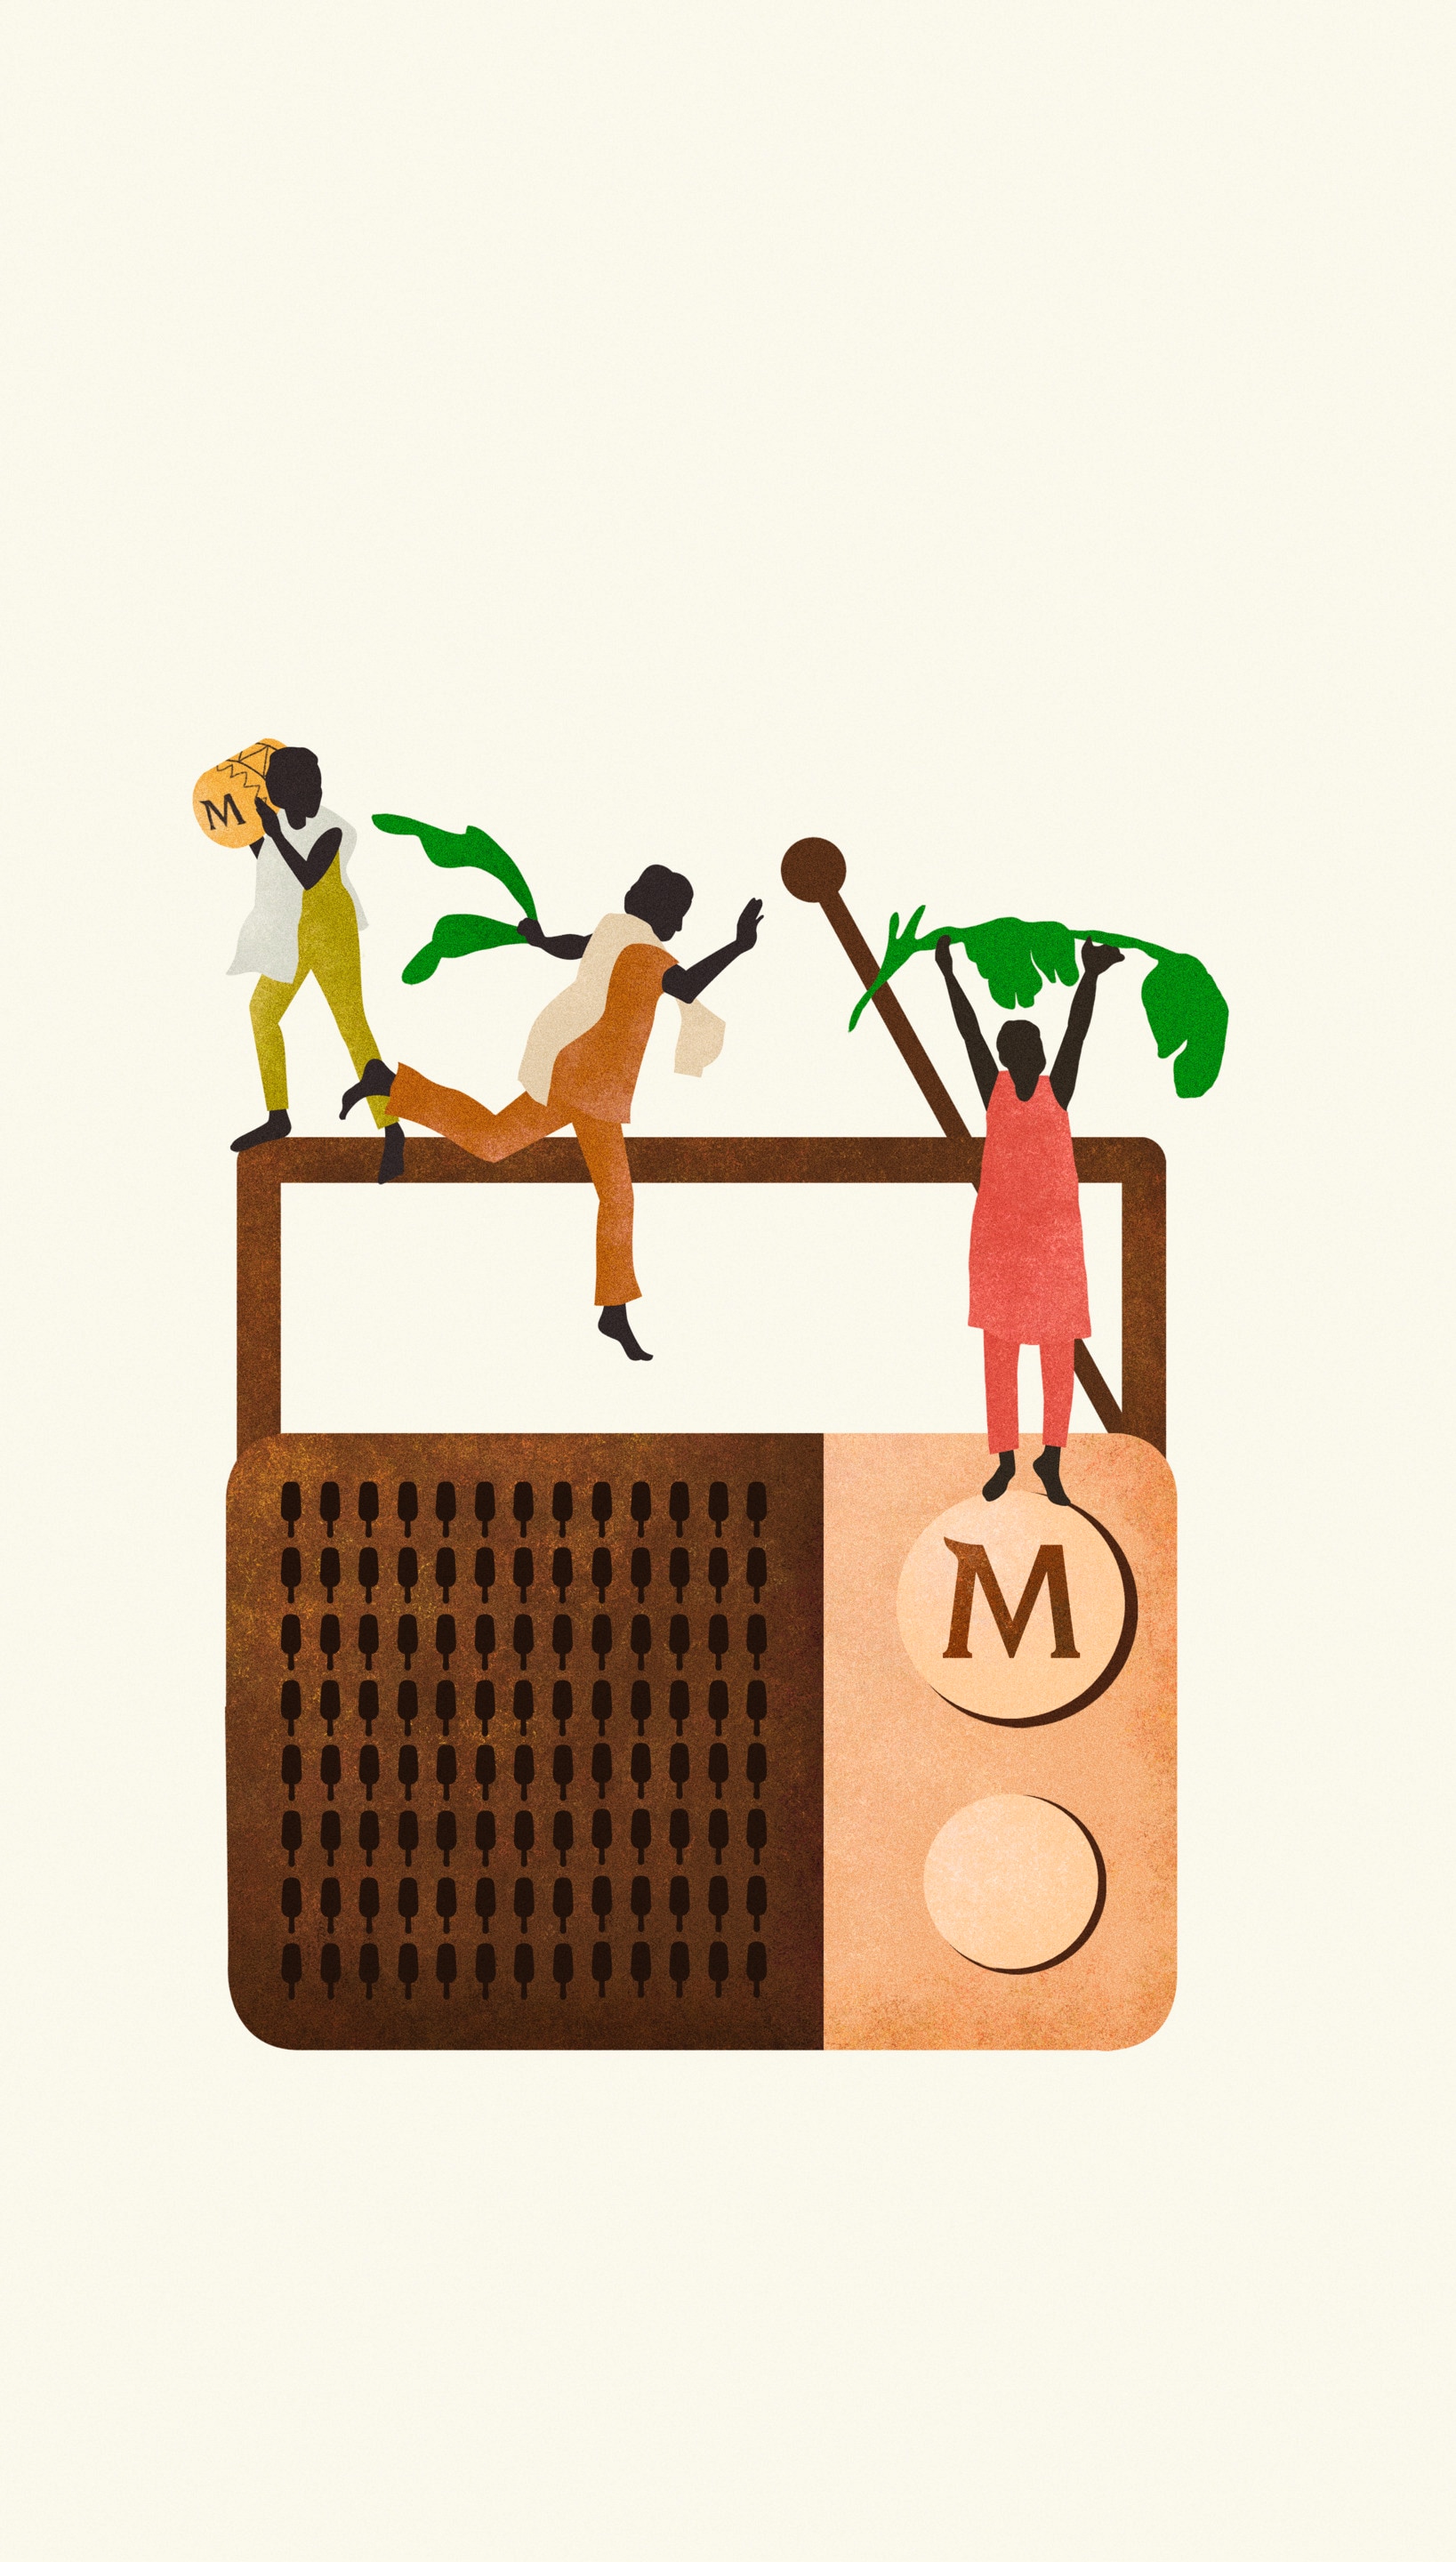 Ilustration of a large old style Magnum branded radio, with three people dancing and interacting with large green leaves.